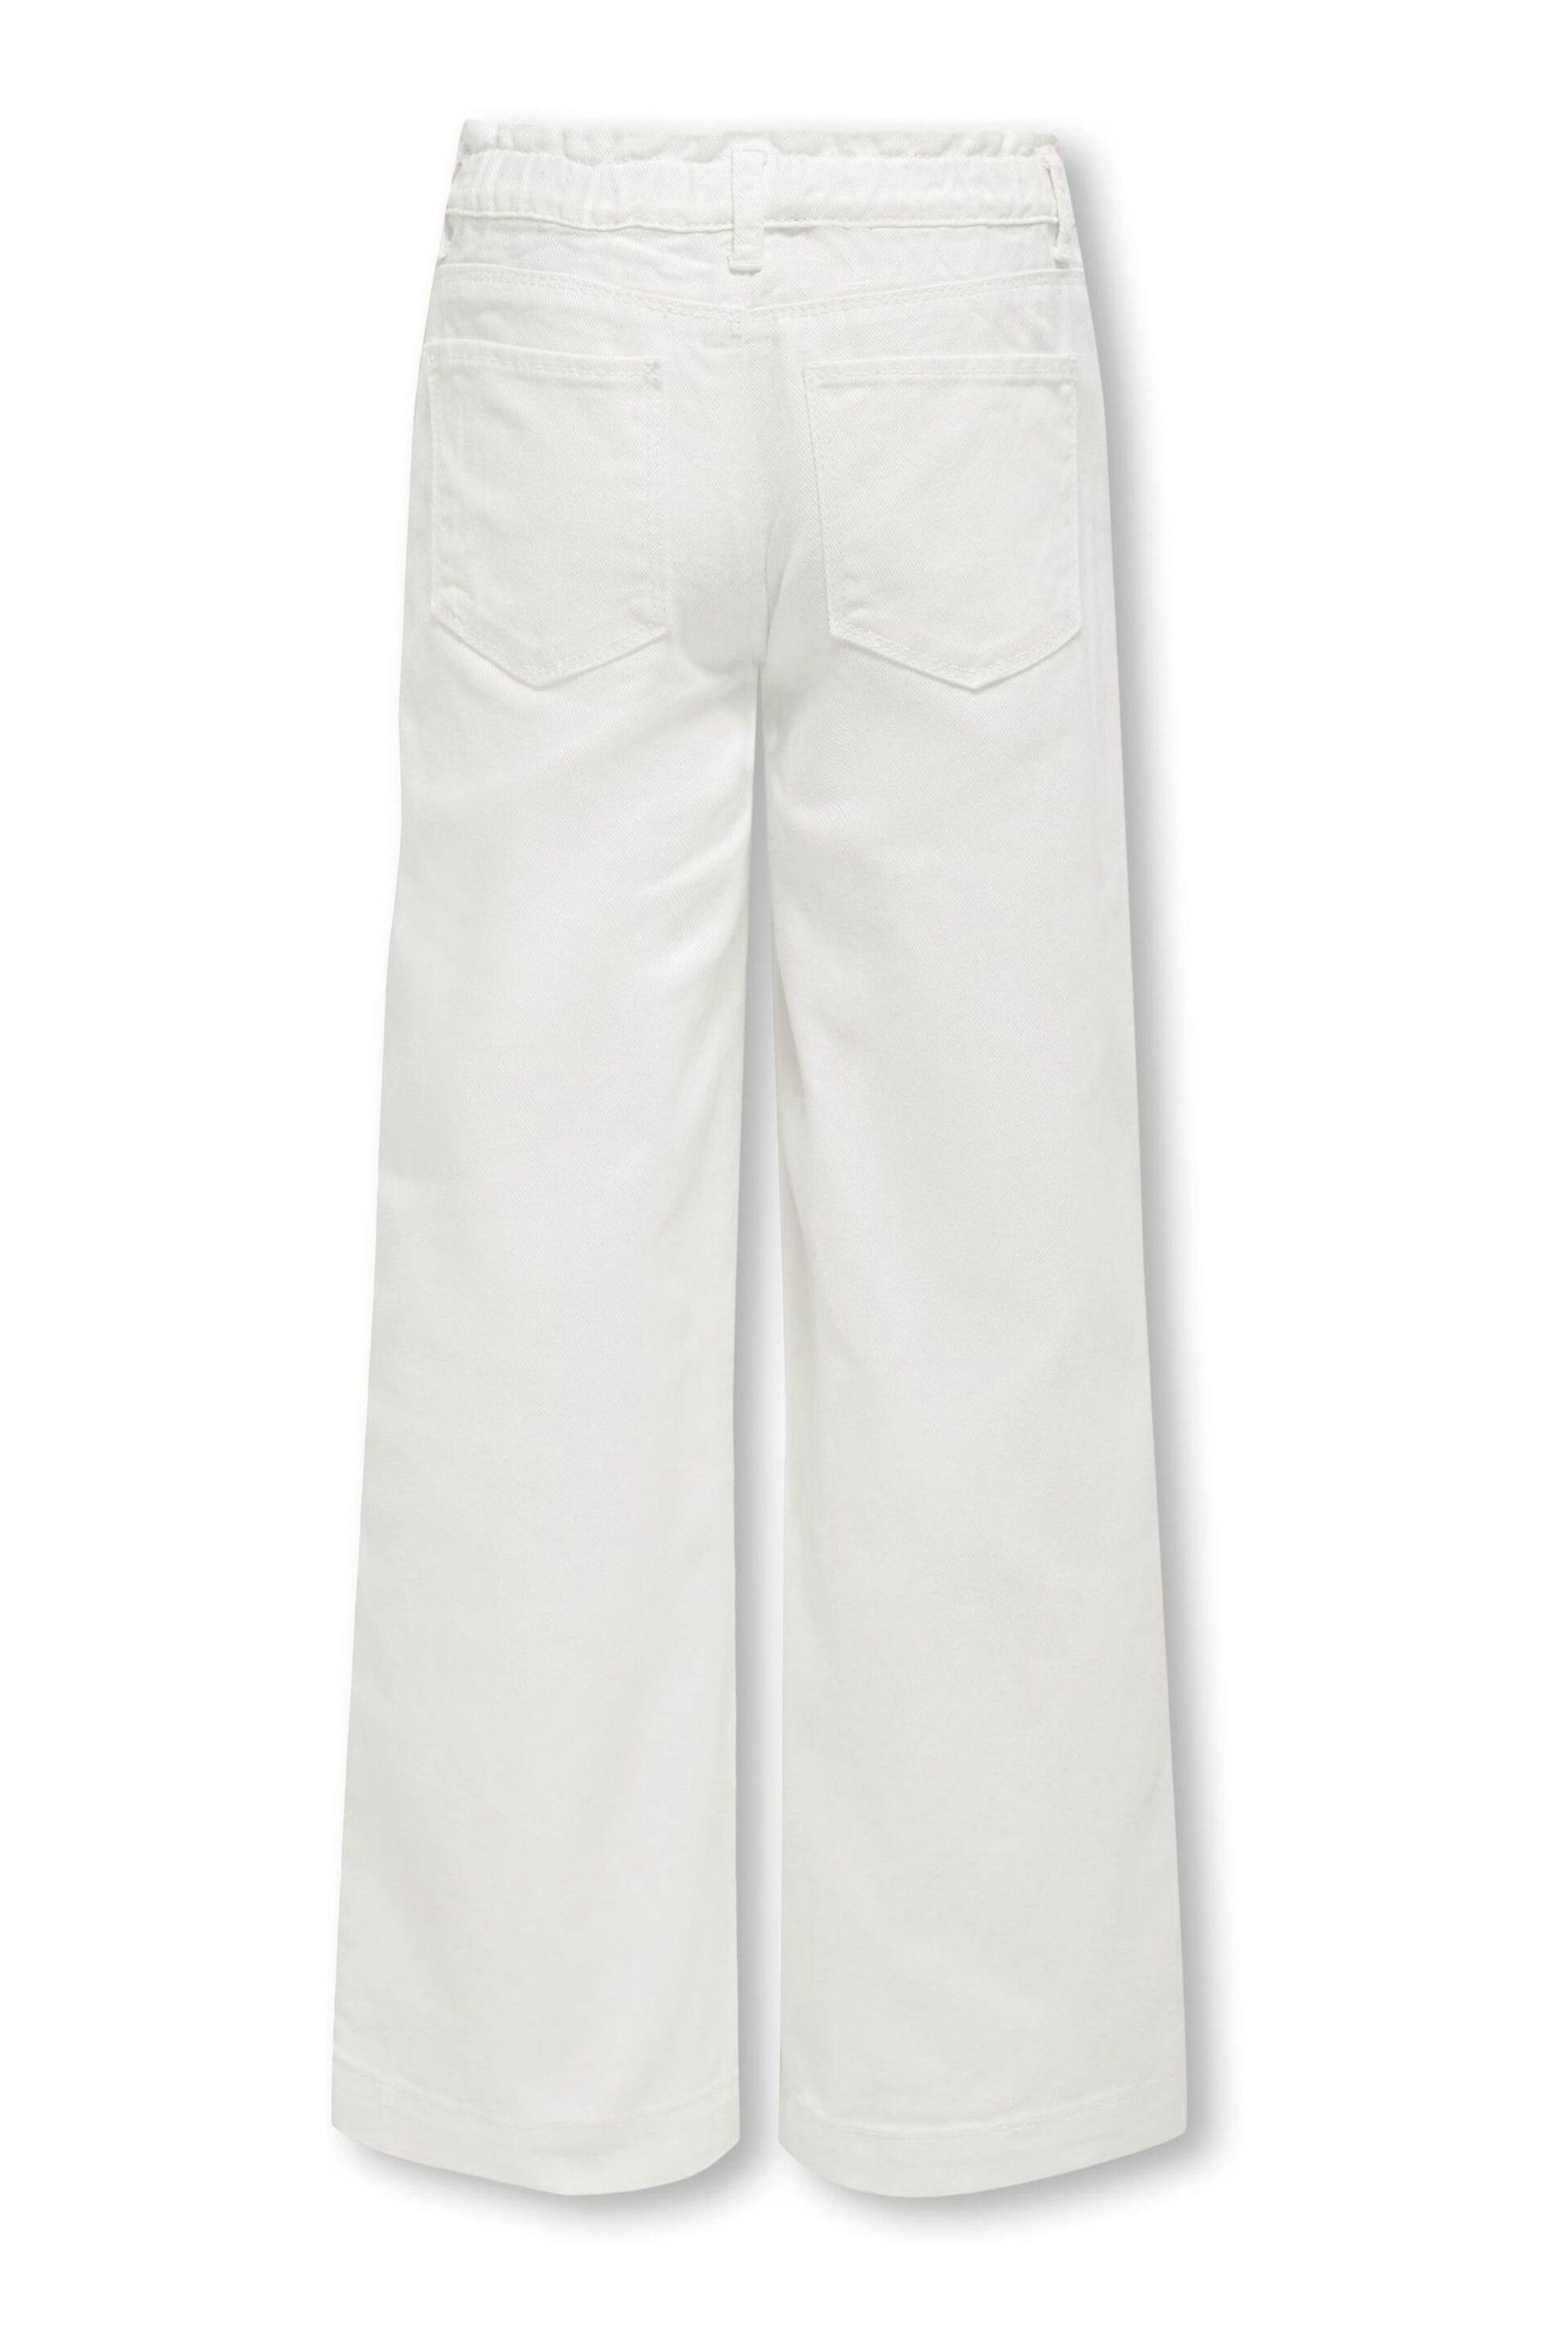 ONLY KIDS Wide Leg Adjustable Waist White Jeans - Image 2 of 2